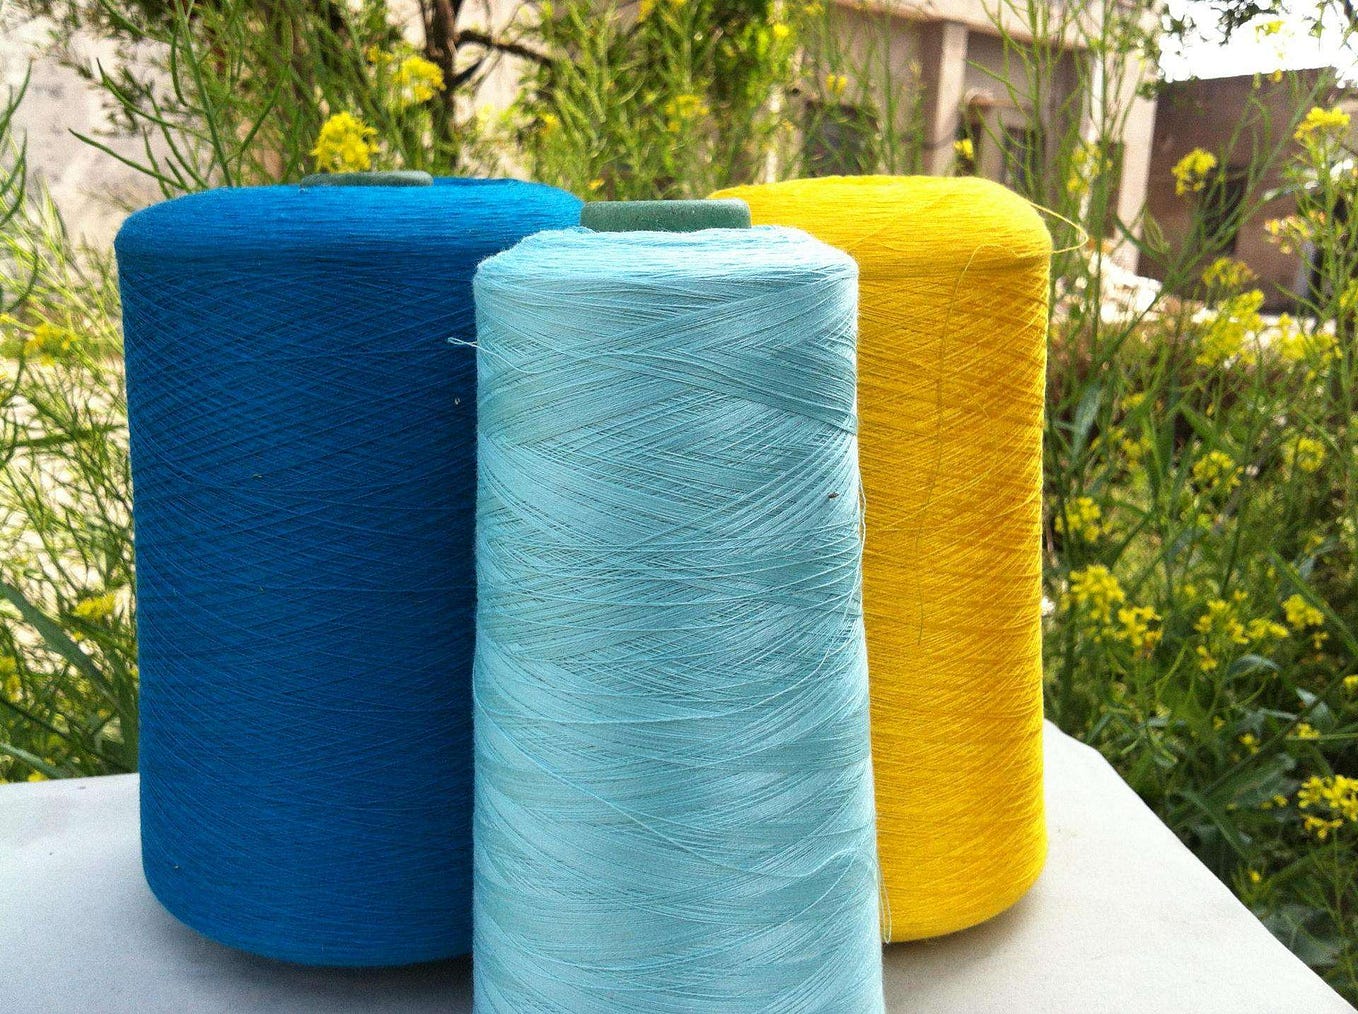 Polyester Yarn Manufacturing Process - From Chips to Yarn - Salud Style